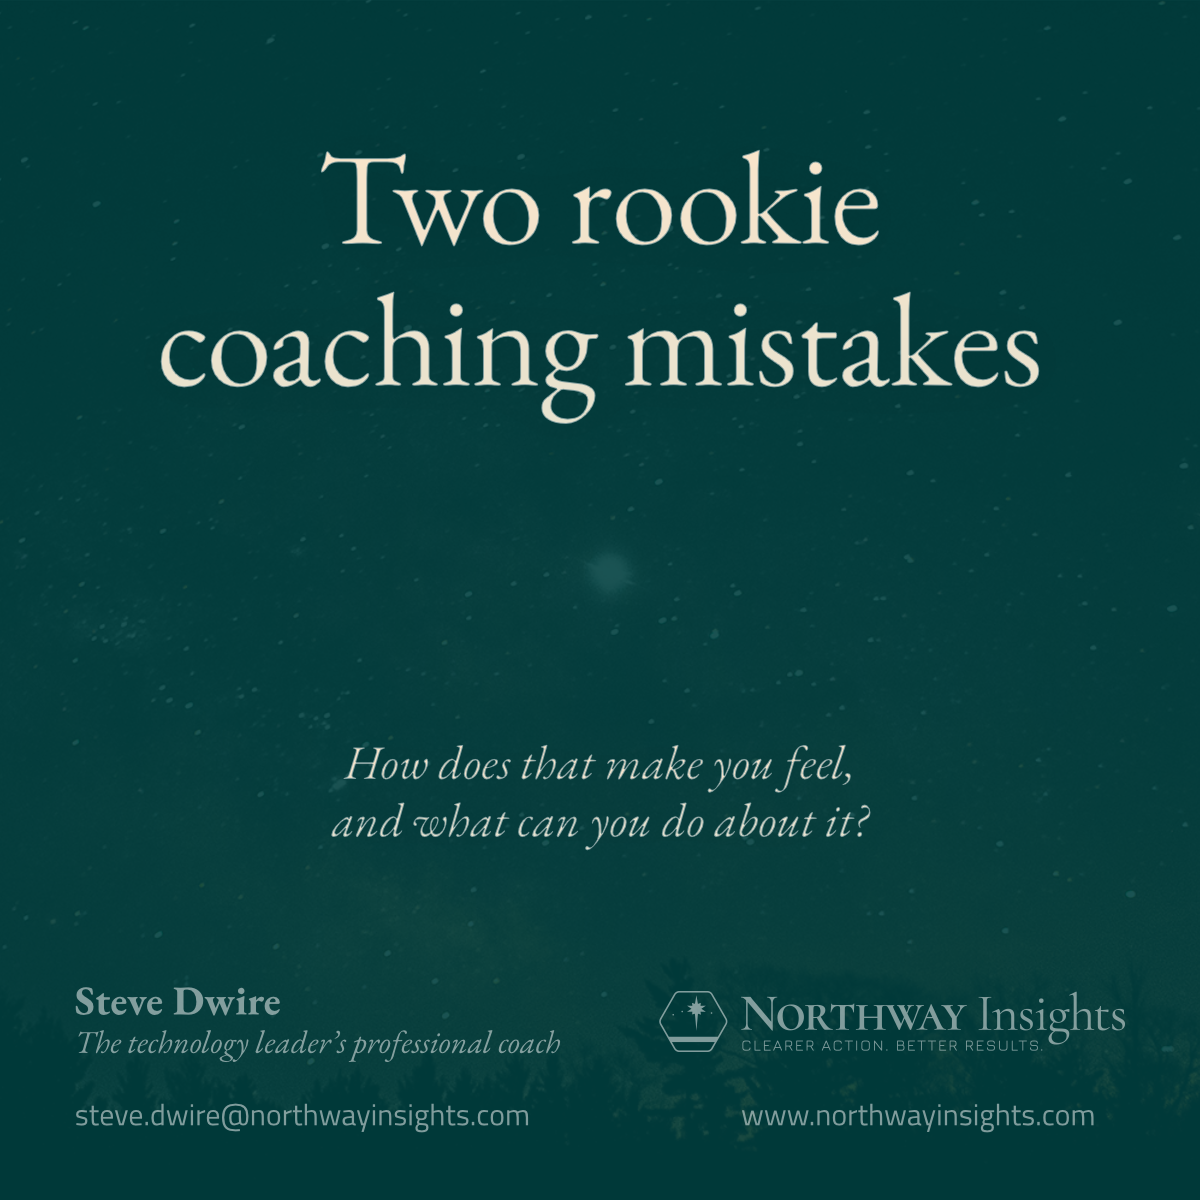 Two rookie coaching mistakes